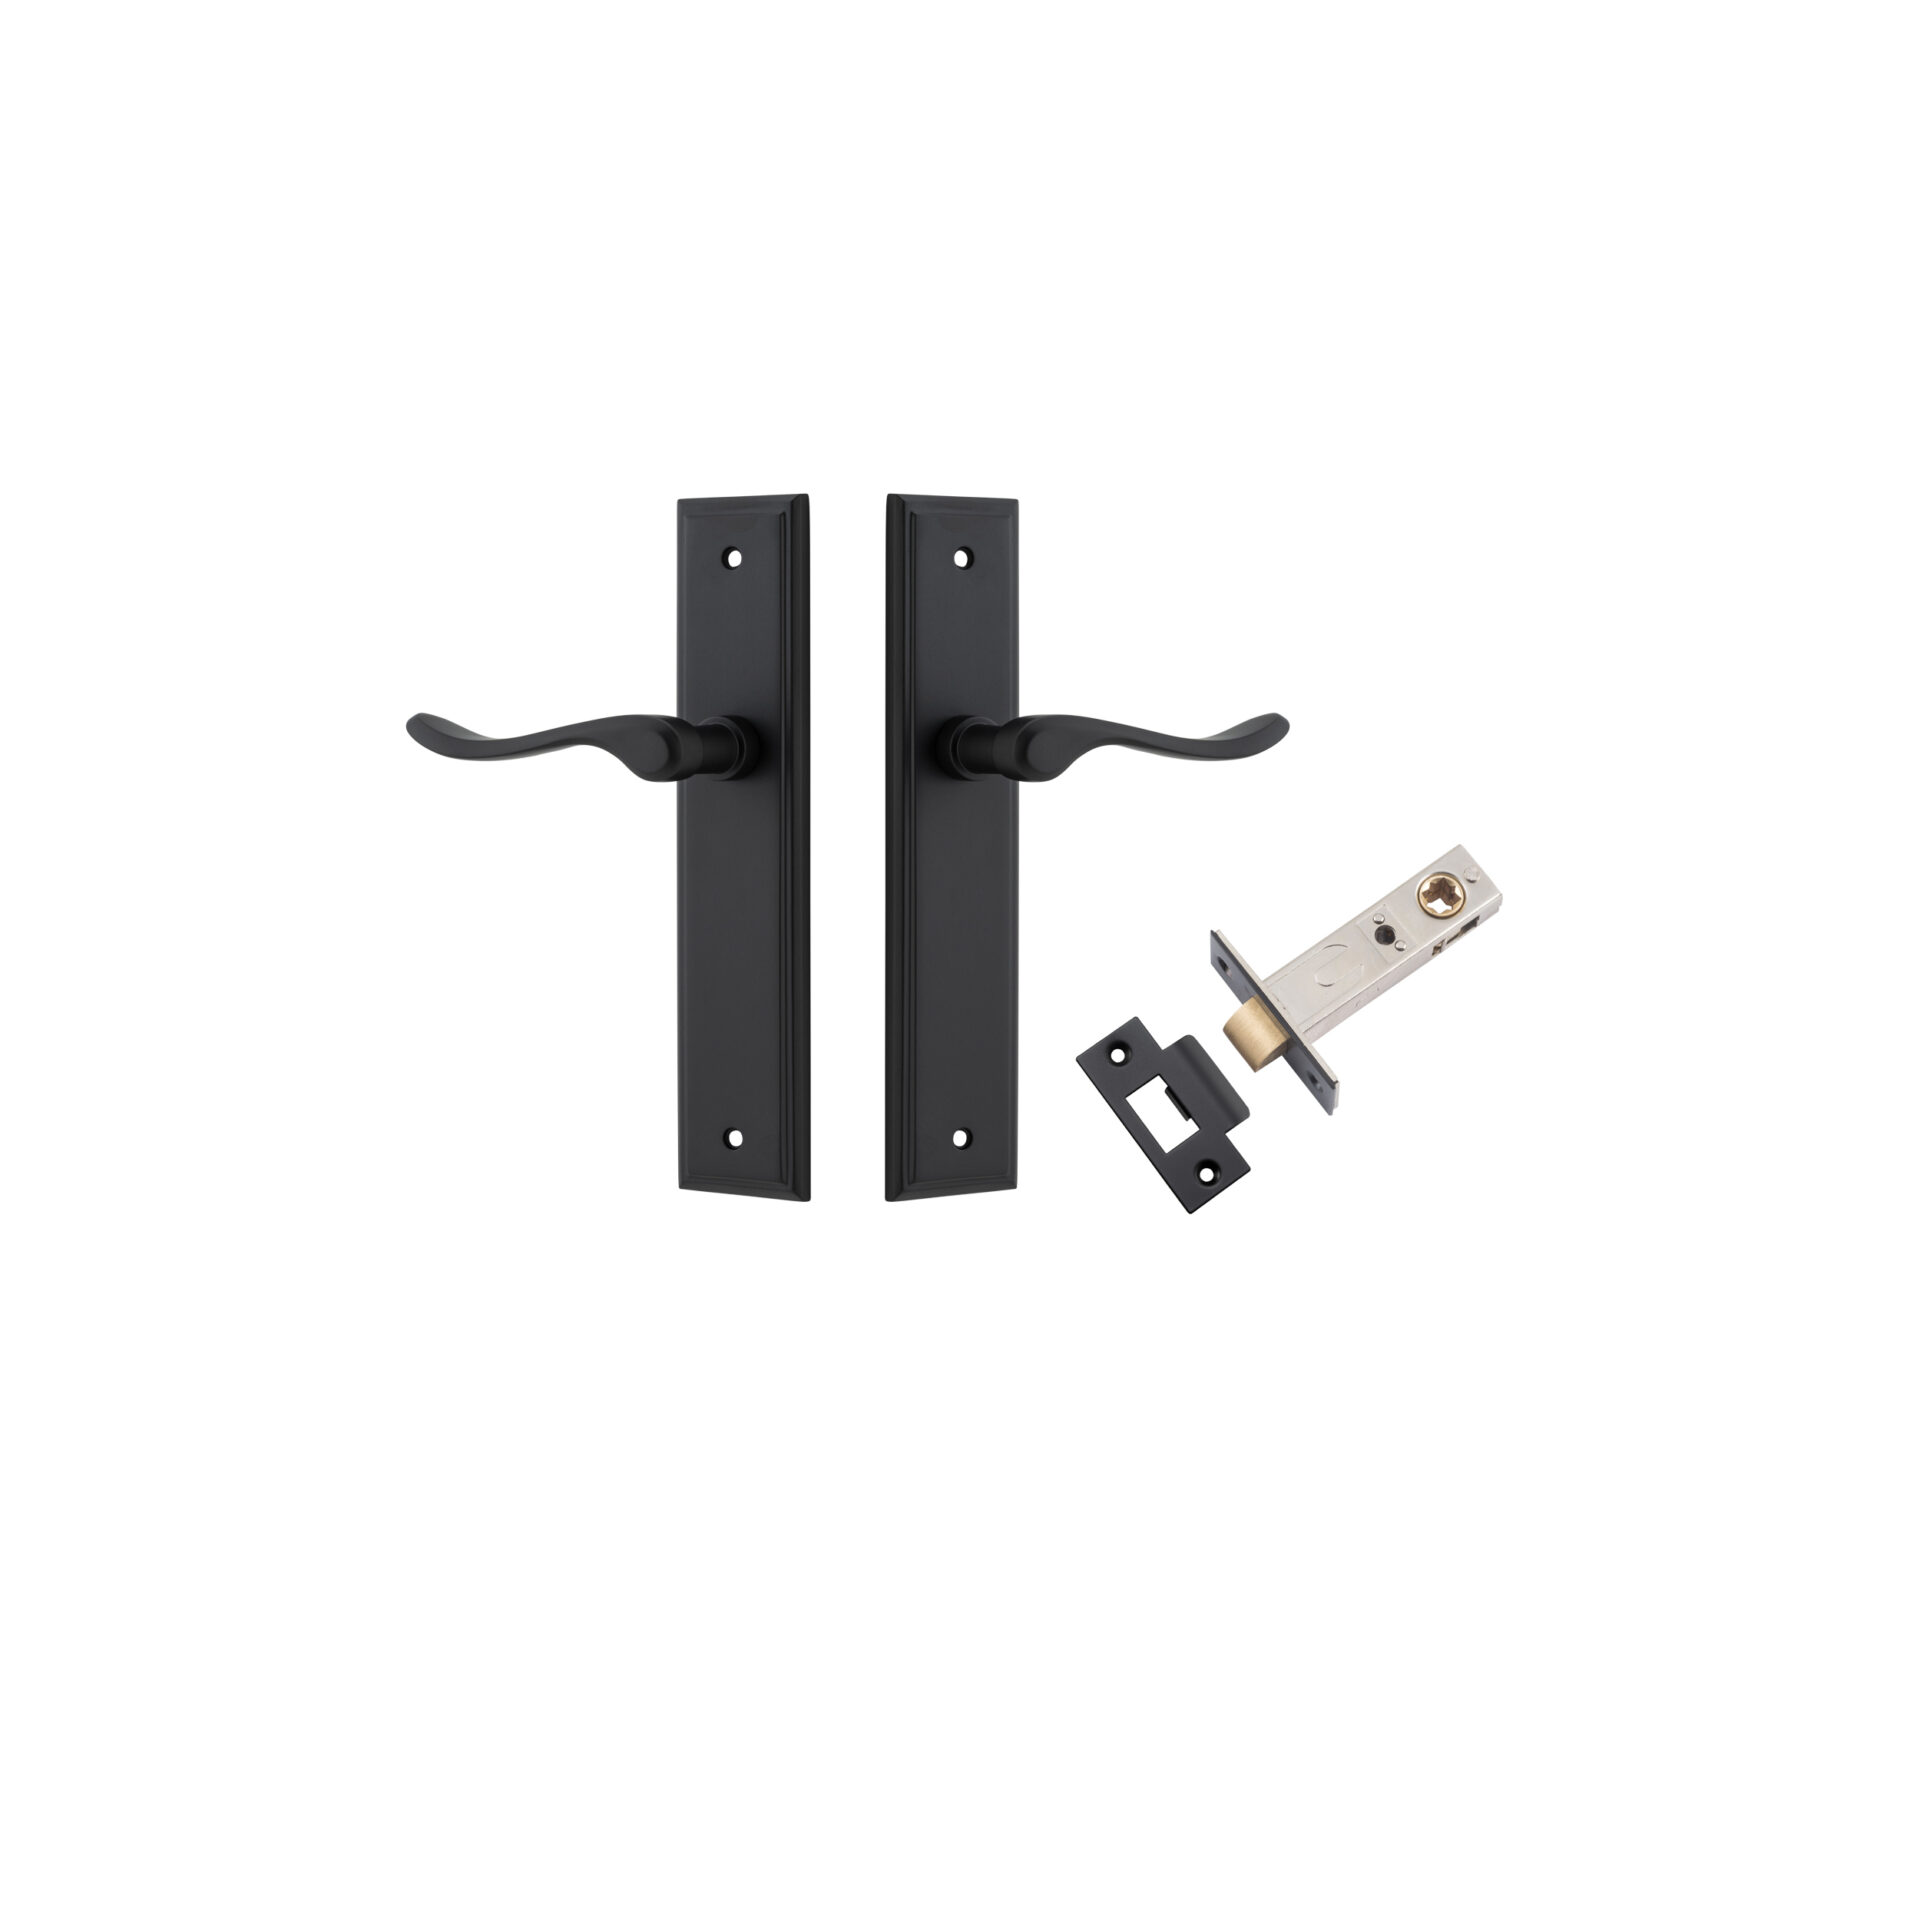 Stirling Lever - Stepped Backplate Passage Kit